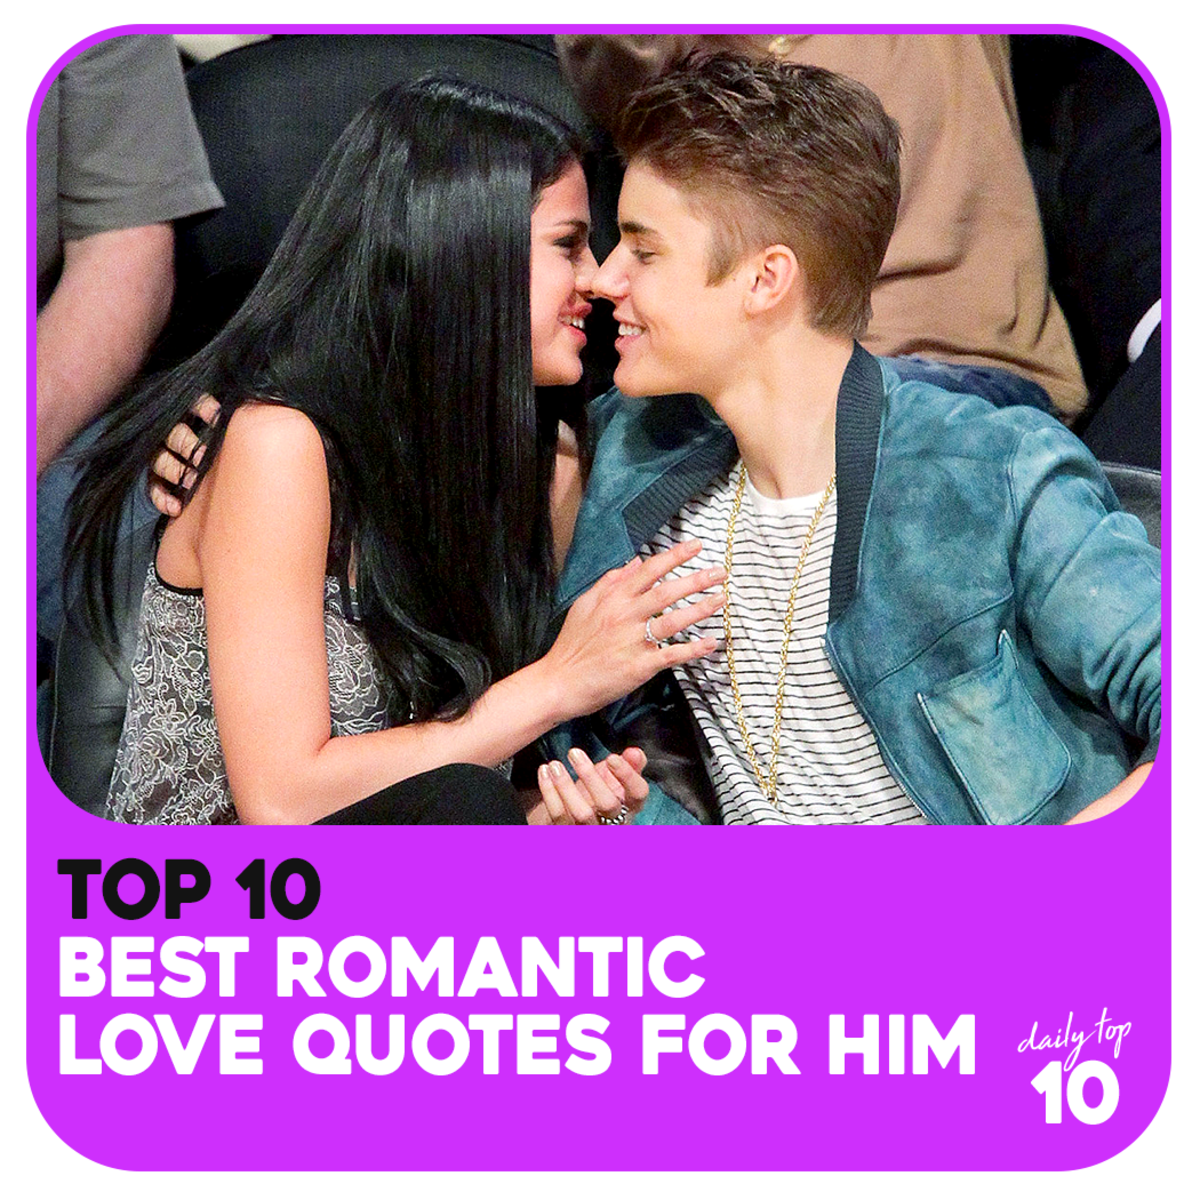 Top 10 Love Quotes for Him (Featuring Justin Bieber and Selena Gomez)